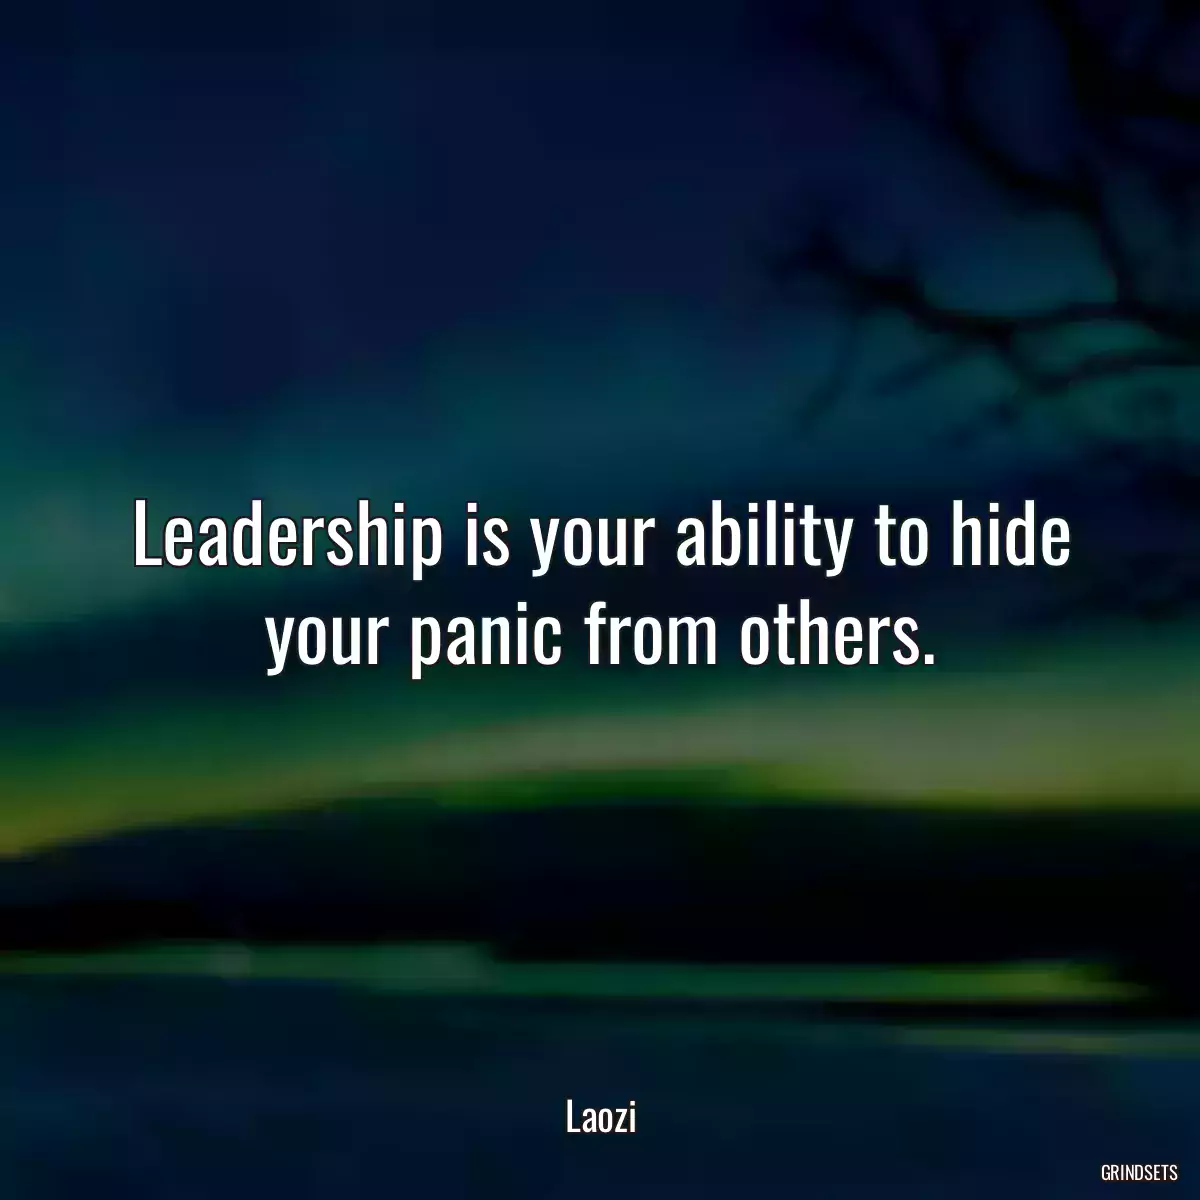 Leadership is your ability to hide your panic from others.